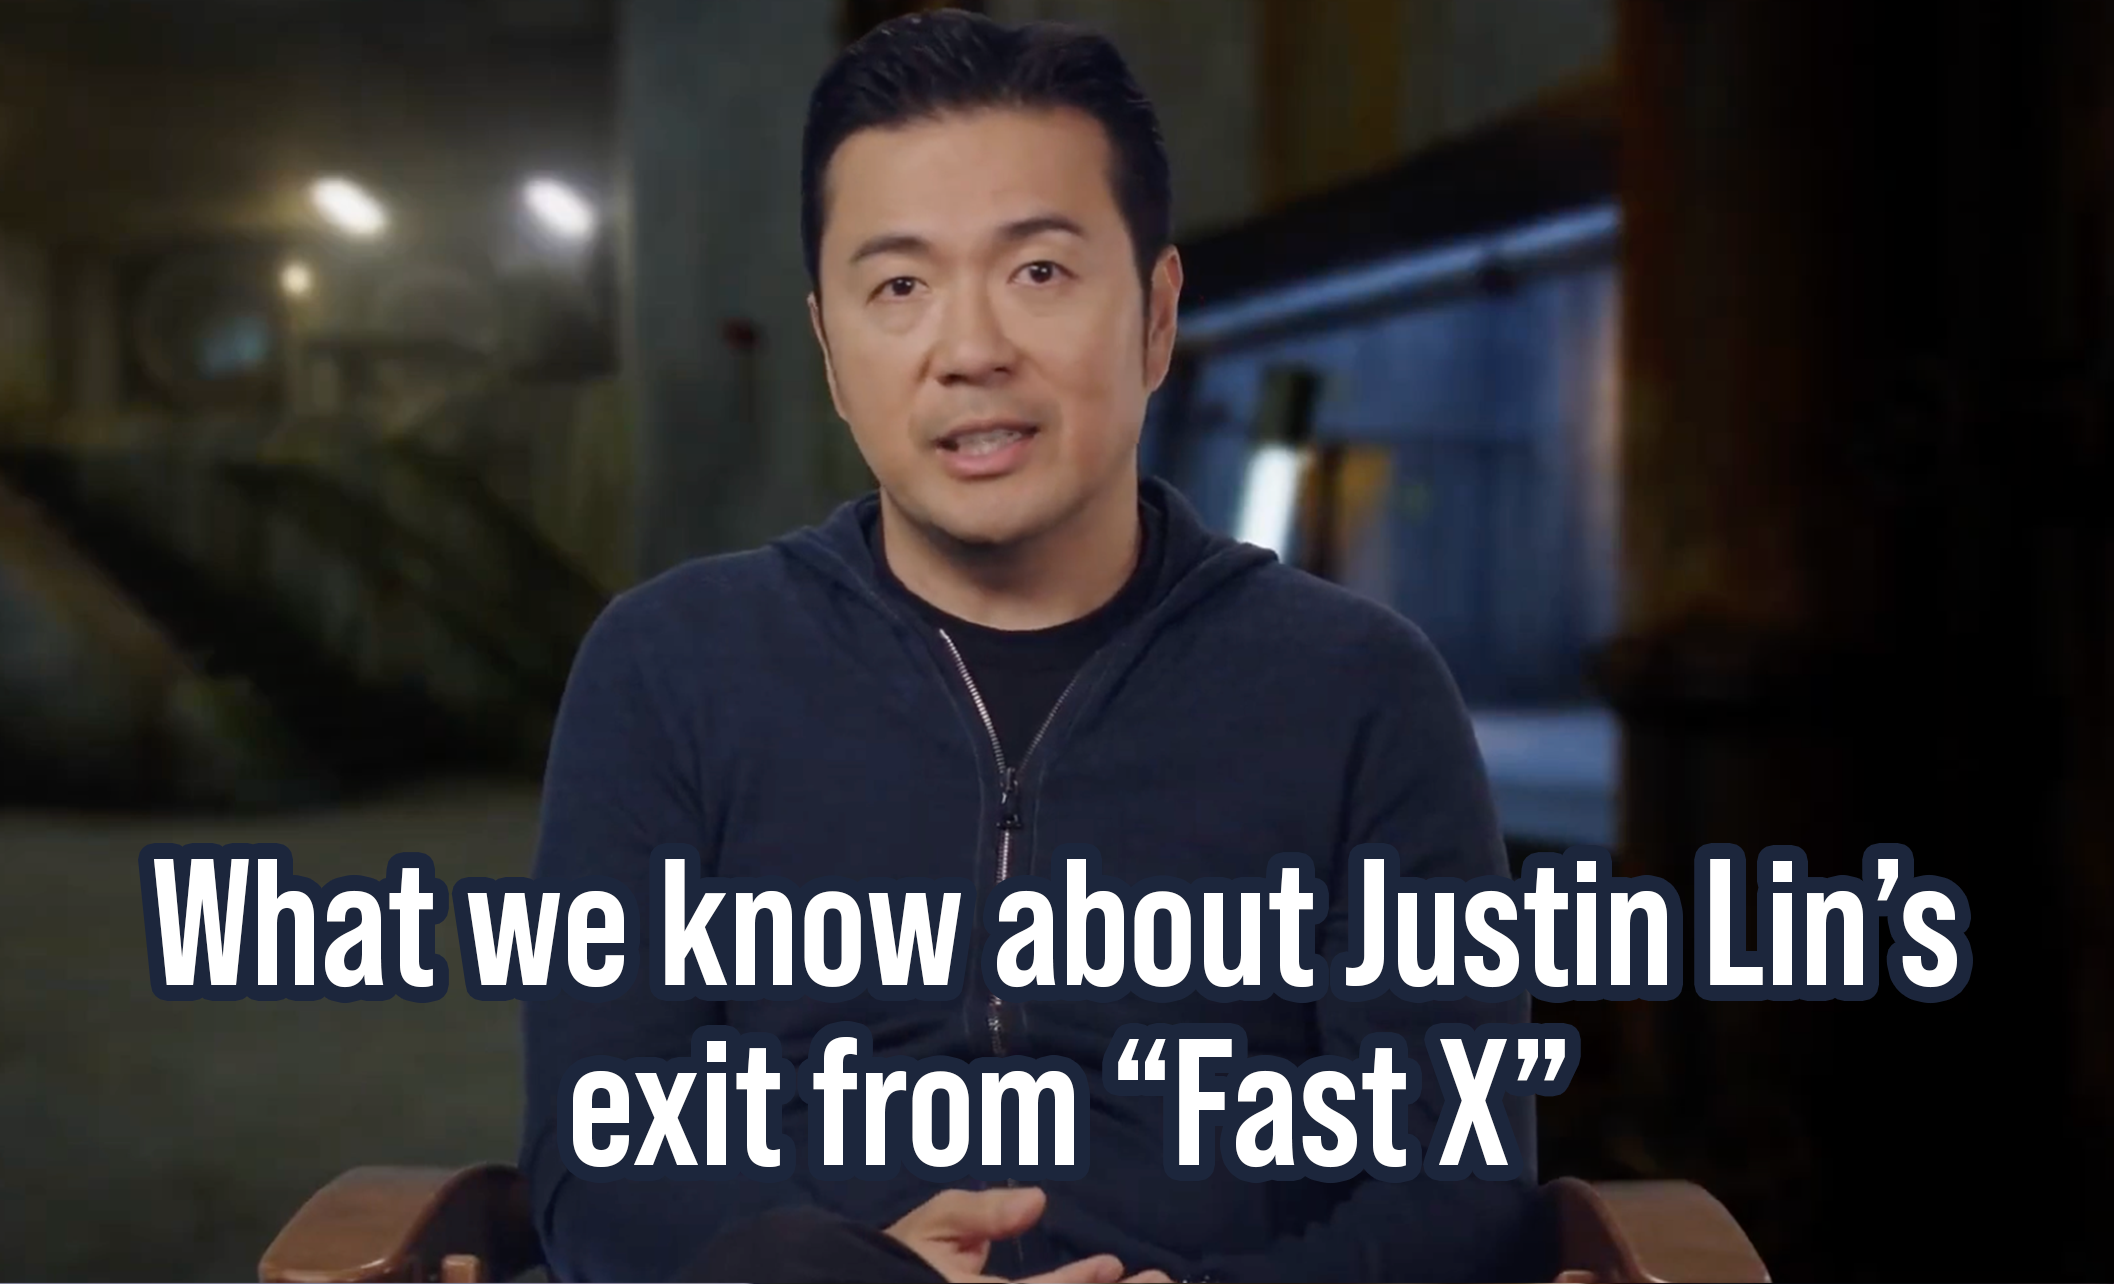 What we know about Justin Lin’s exit from “Fast X”